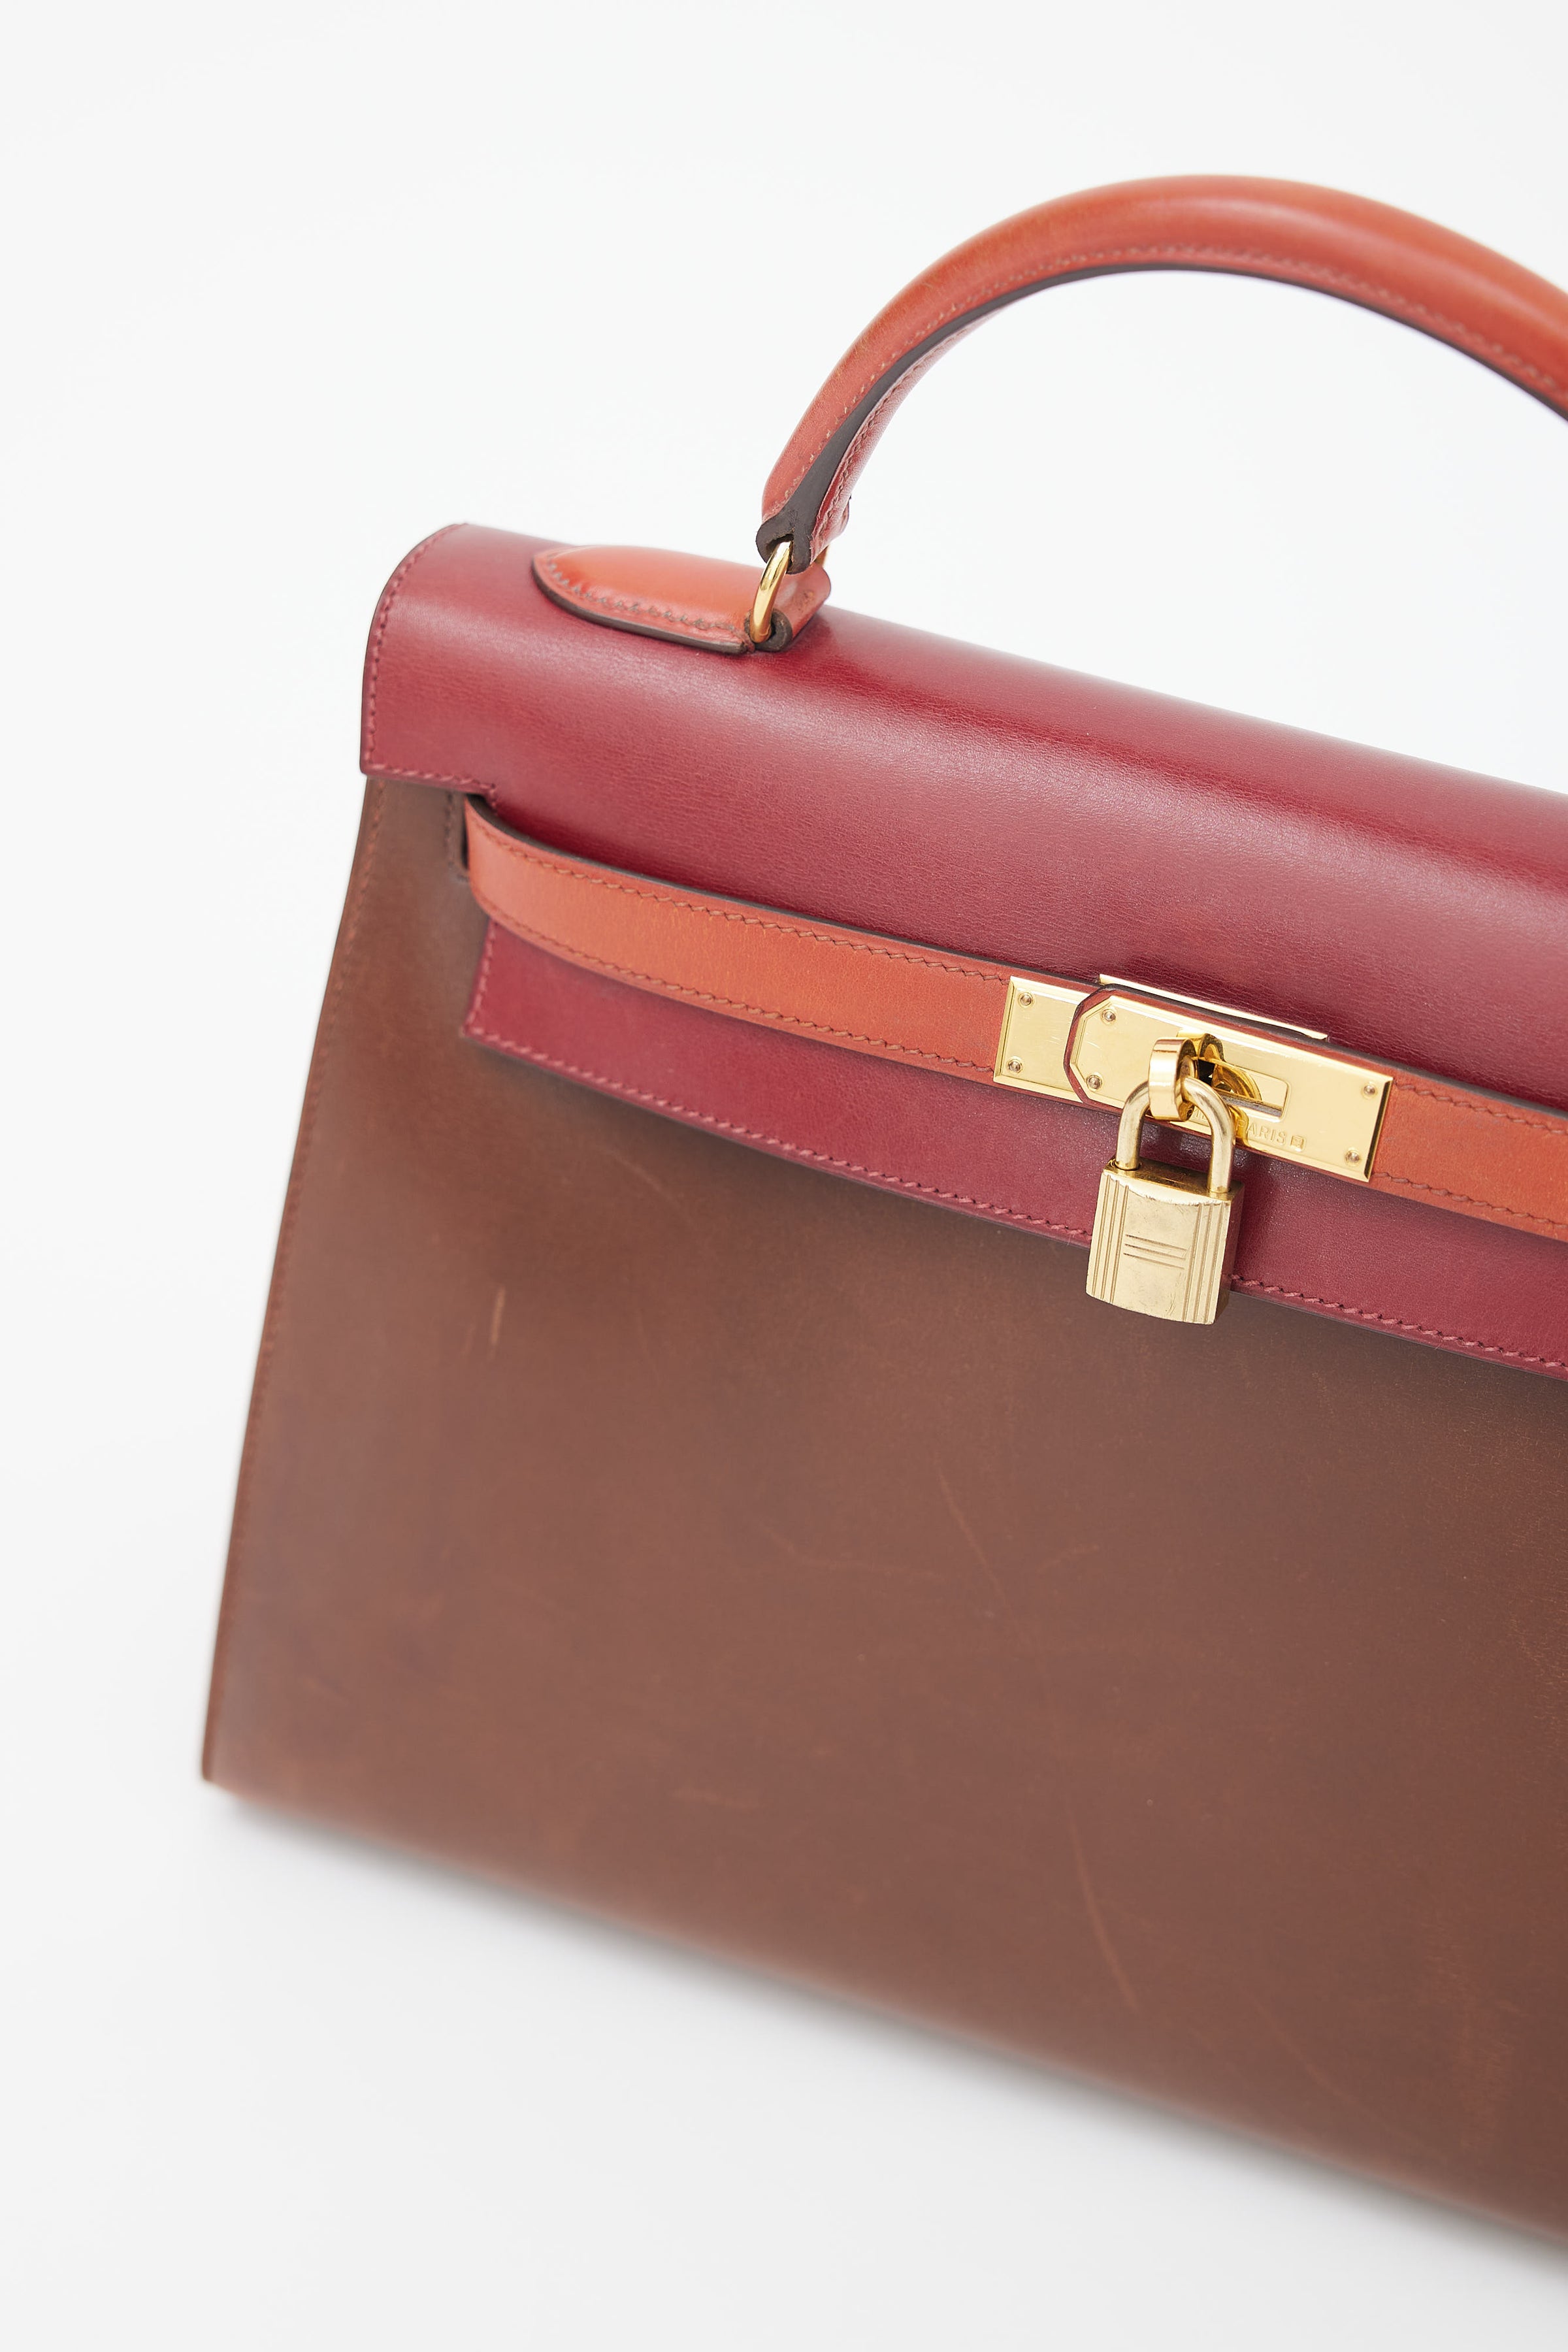 hermes rouge sellier color